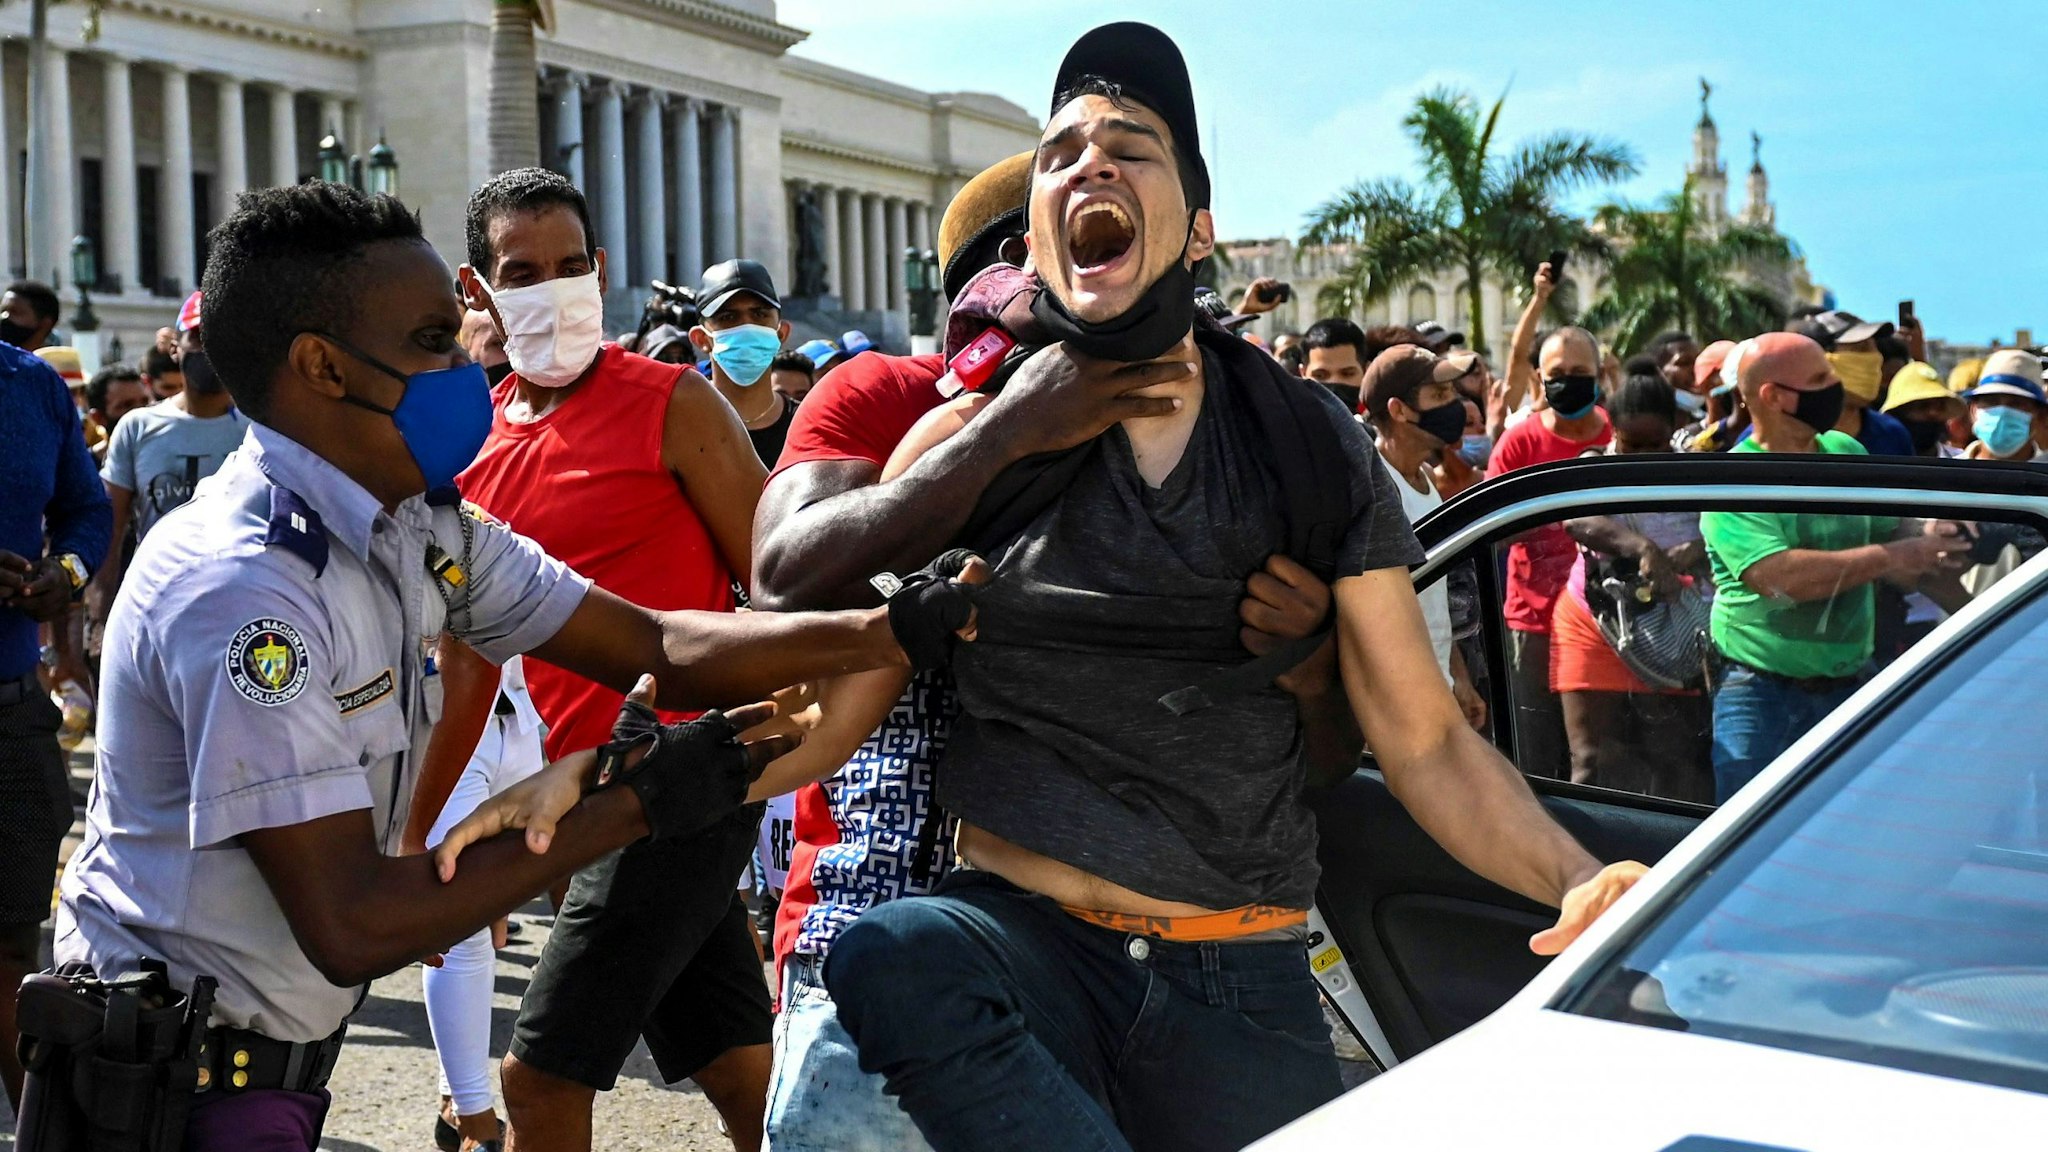 A man is arrested during a demonstration against the government of Cuban President Miguel Diaz-Canel in Havana, on July 11, 2021. - Thousands of Cubans took part in rare protests Sunday against the communist government, marching through a town chanting "Down with the dictatorship" and "We want liberty."